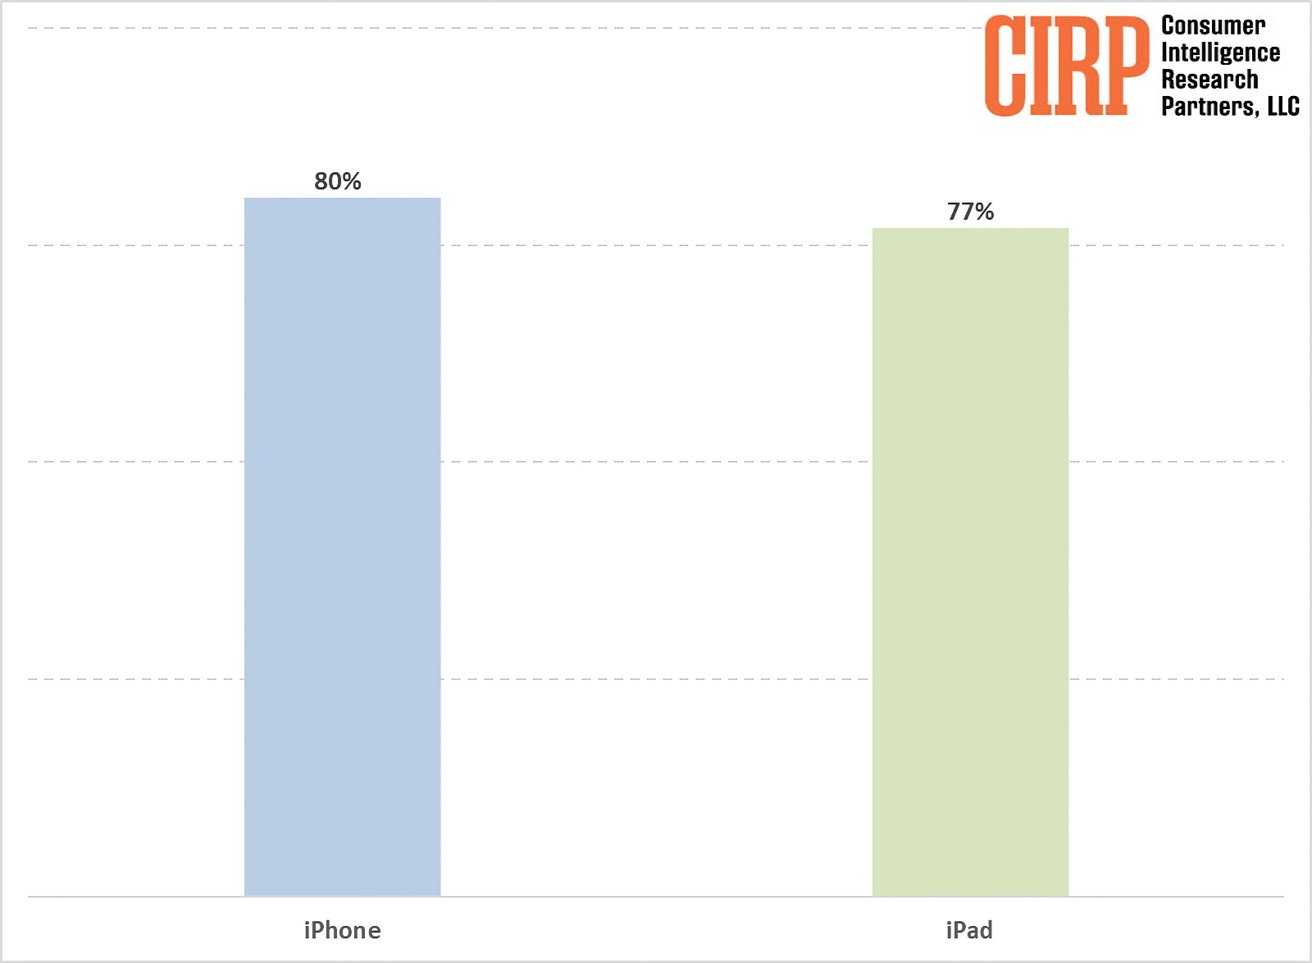 Bar chart comparing iPhone at 80% and iPad at 77%, presumably representing some form of metric or satisfaction rate.